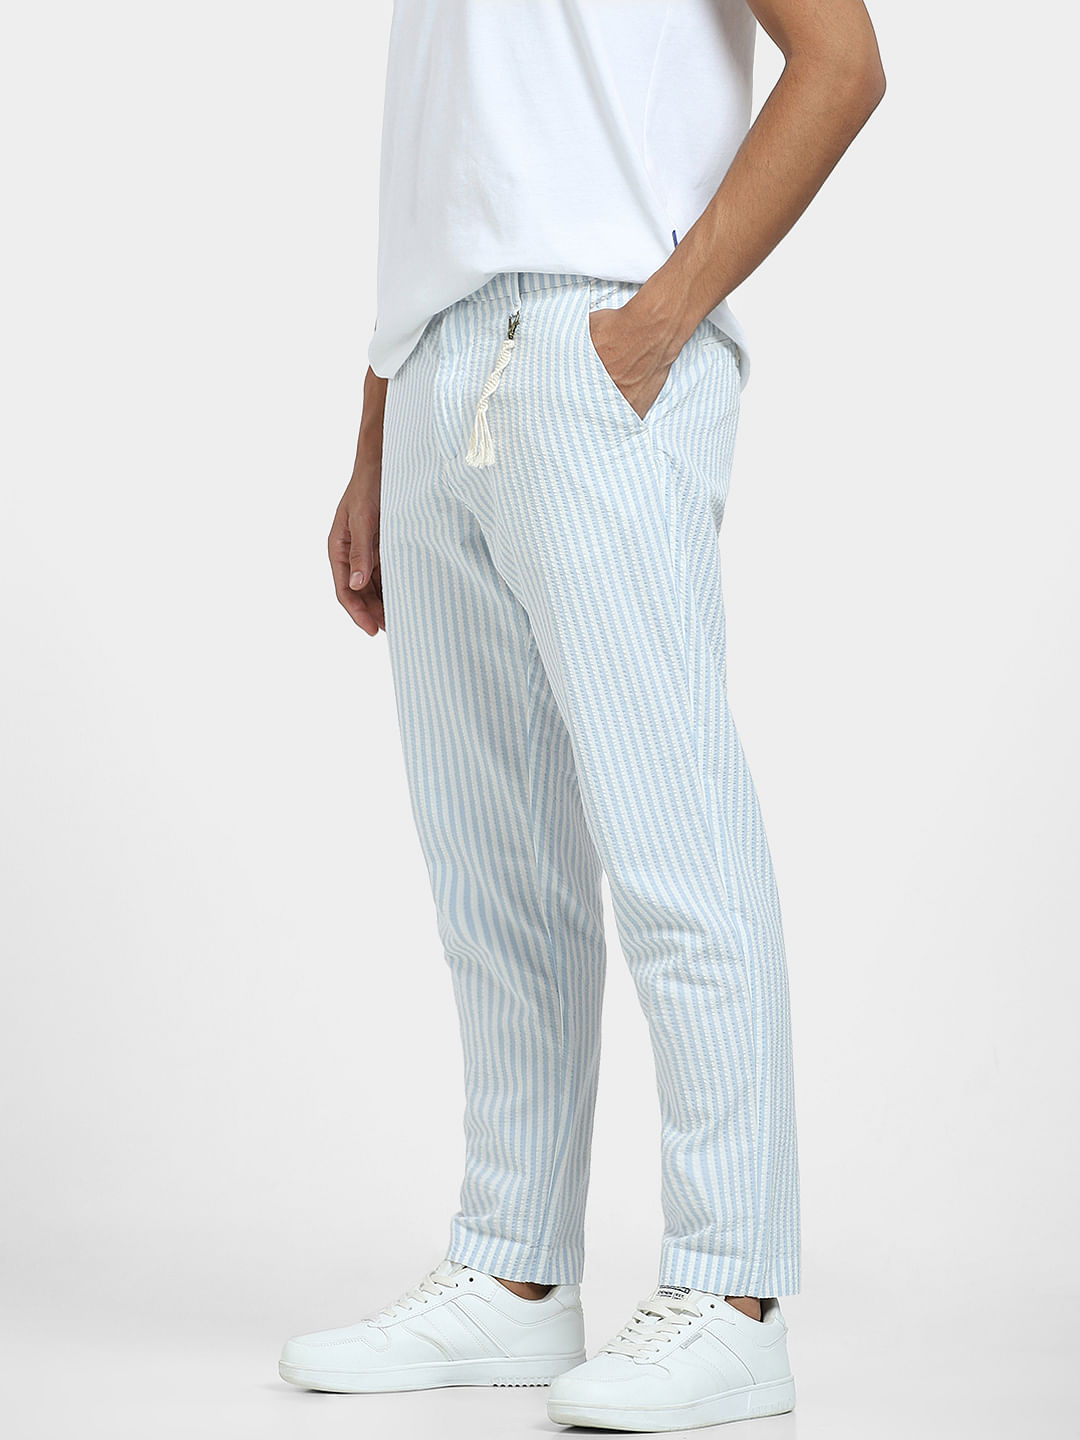 OVER-D Chino Striped Pants OE1S2S3P21 Blue - White | CENTROstile Size (42  56) 52